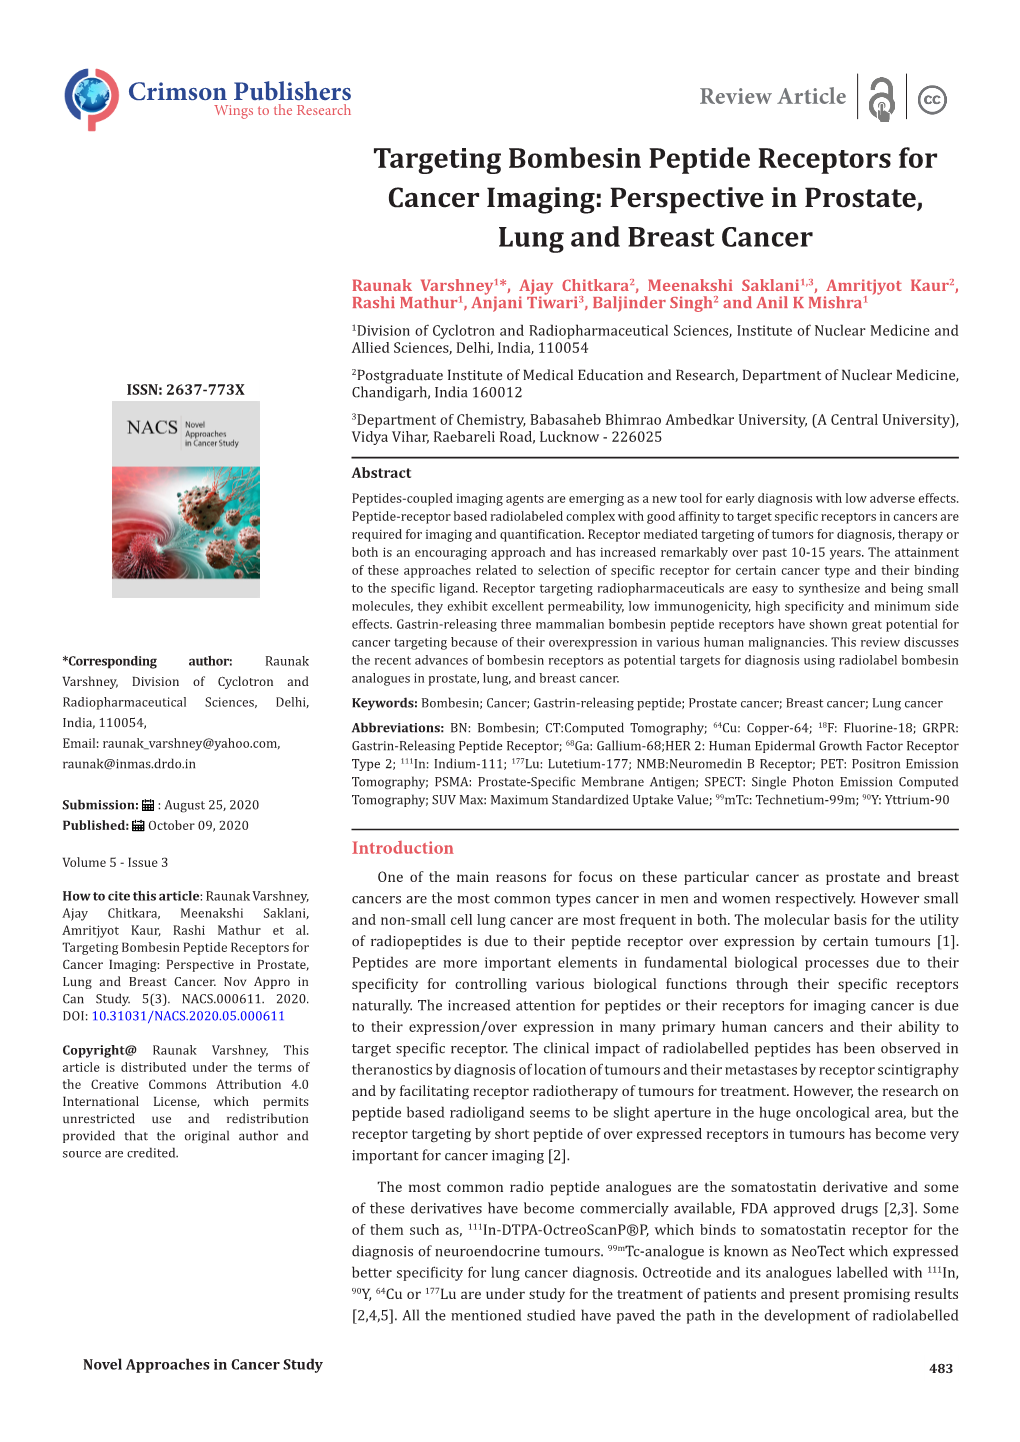 Targeting Bombesin Peptide Receptors for Cancer Imaging: Perspective in Prostate, Lung and Breast Cancer